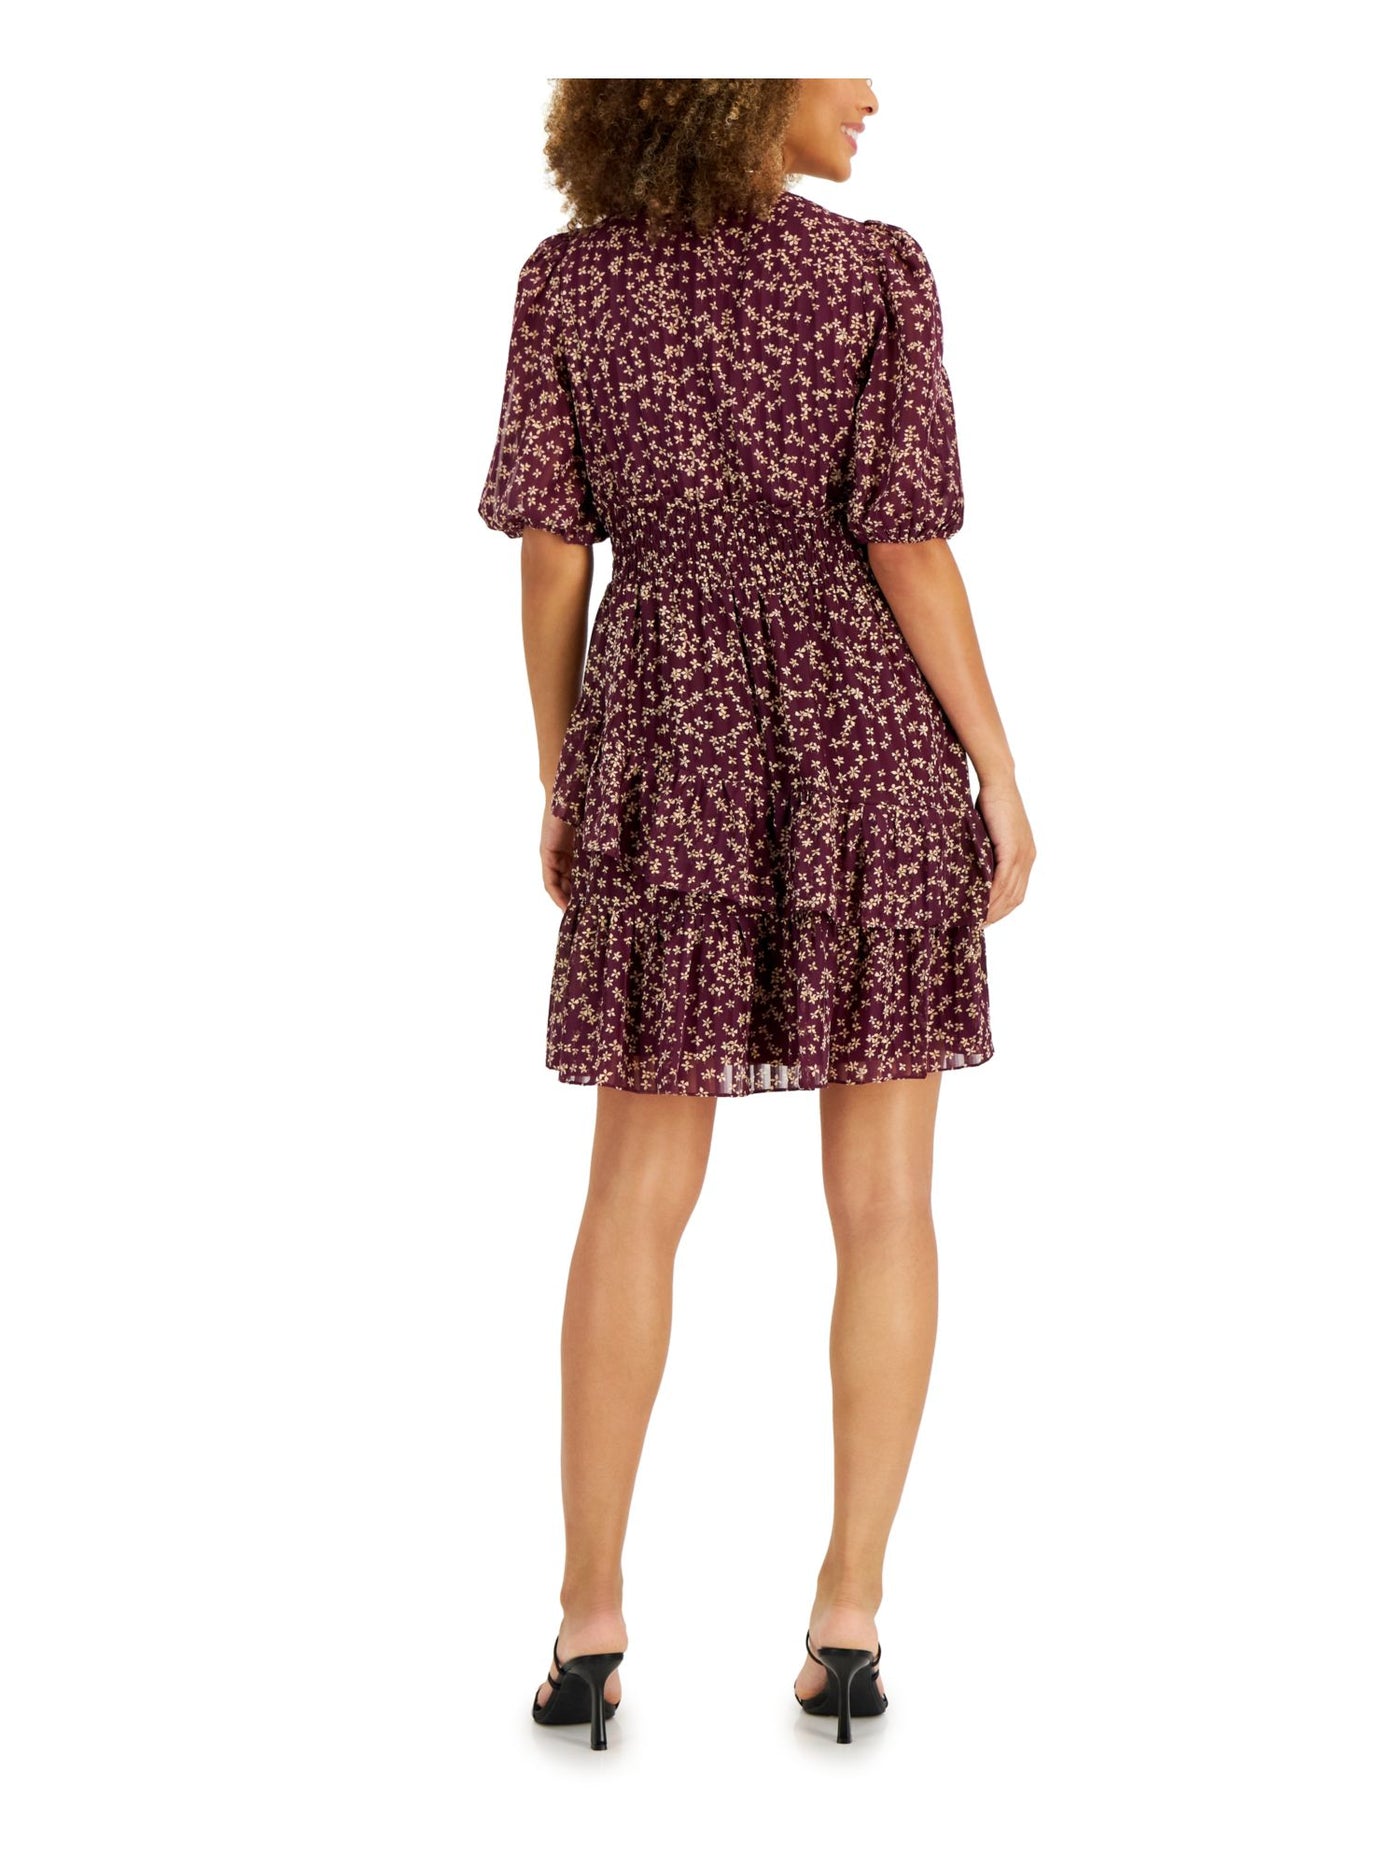 TAYLOR Womens Purple Lined Smocked Tiered Pullover Sheer Ruffled Floral Pouf Sleeve Split Above The Knee Fit + Flare Dress Petites 2P